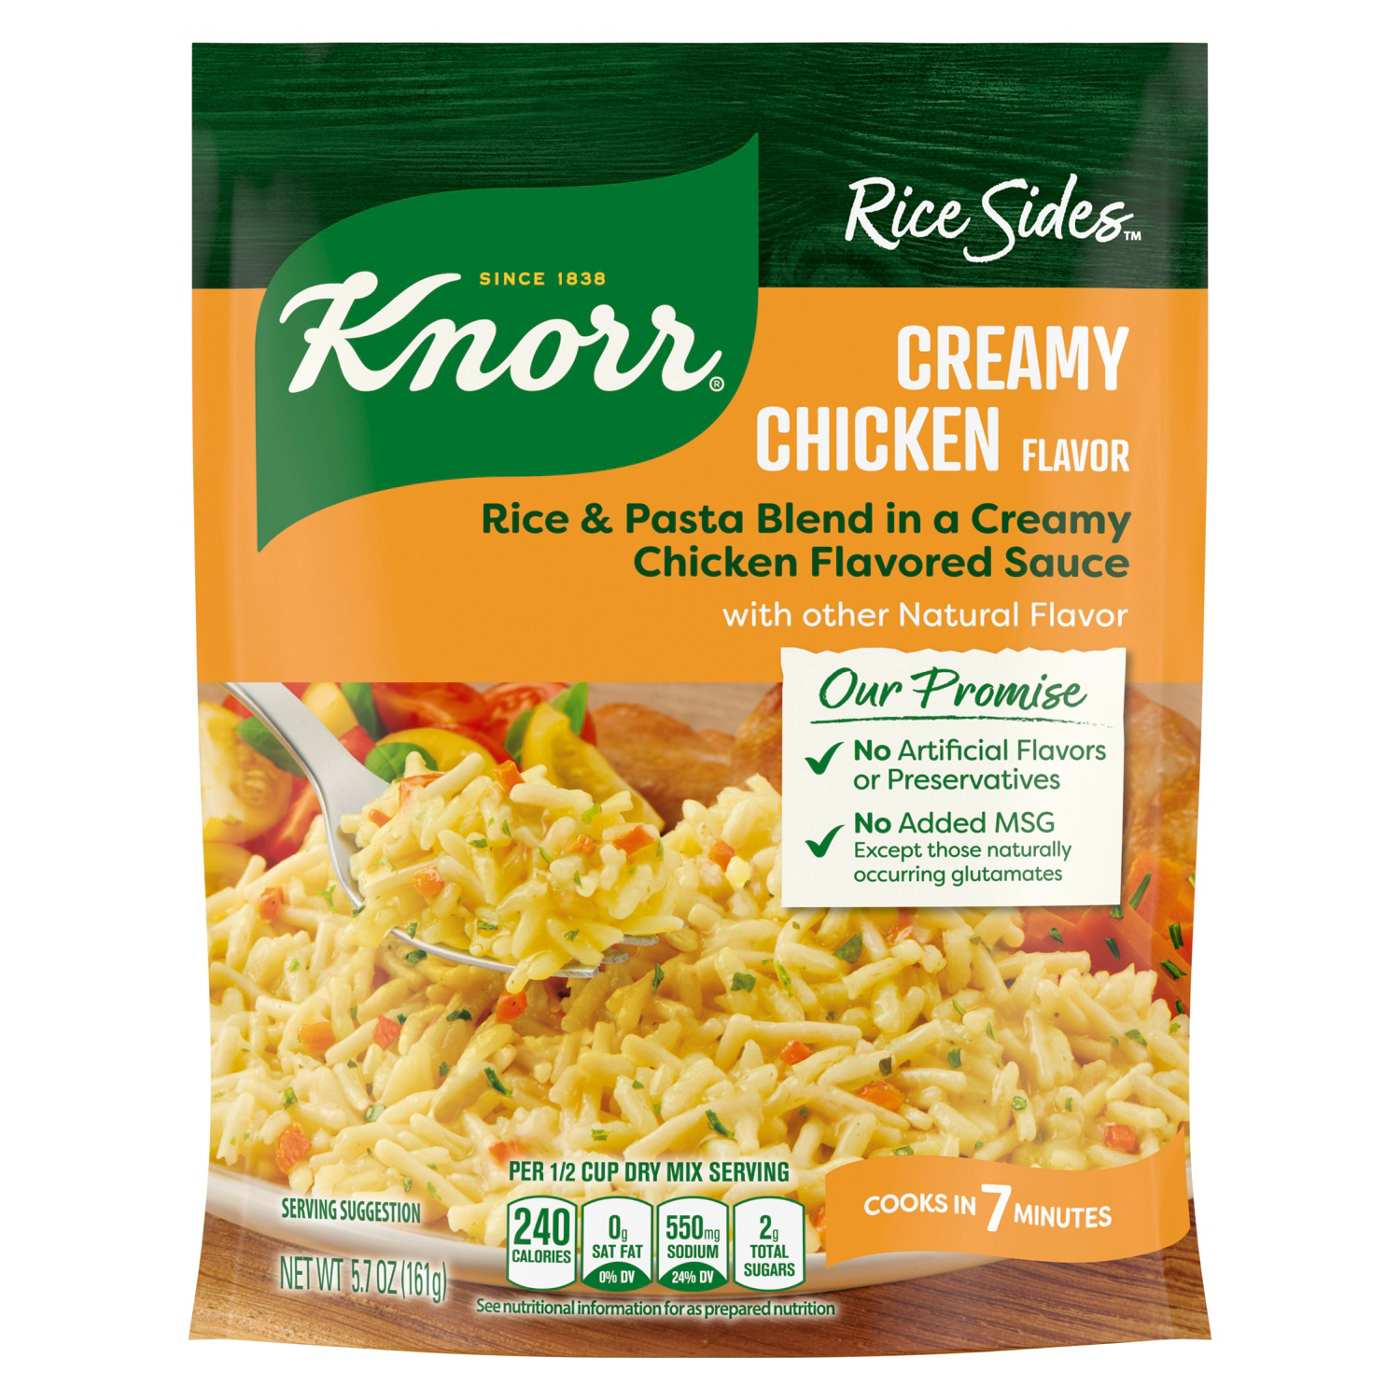 Knorr Rice Sides Creamy Chicken Long Grain Rice and Vermicelli Pasta Blend; image 1 of 3